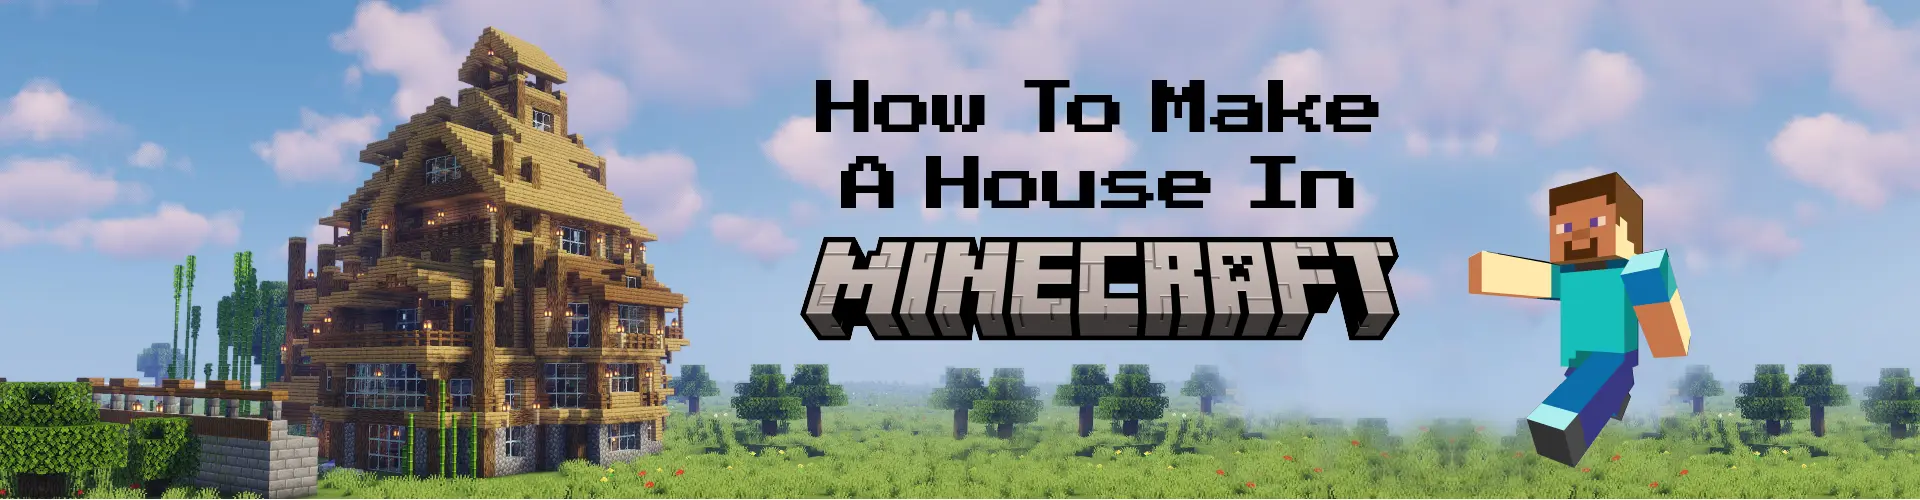 How To Make a House in Minecraft